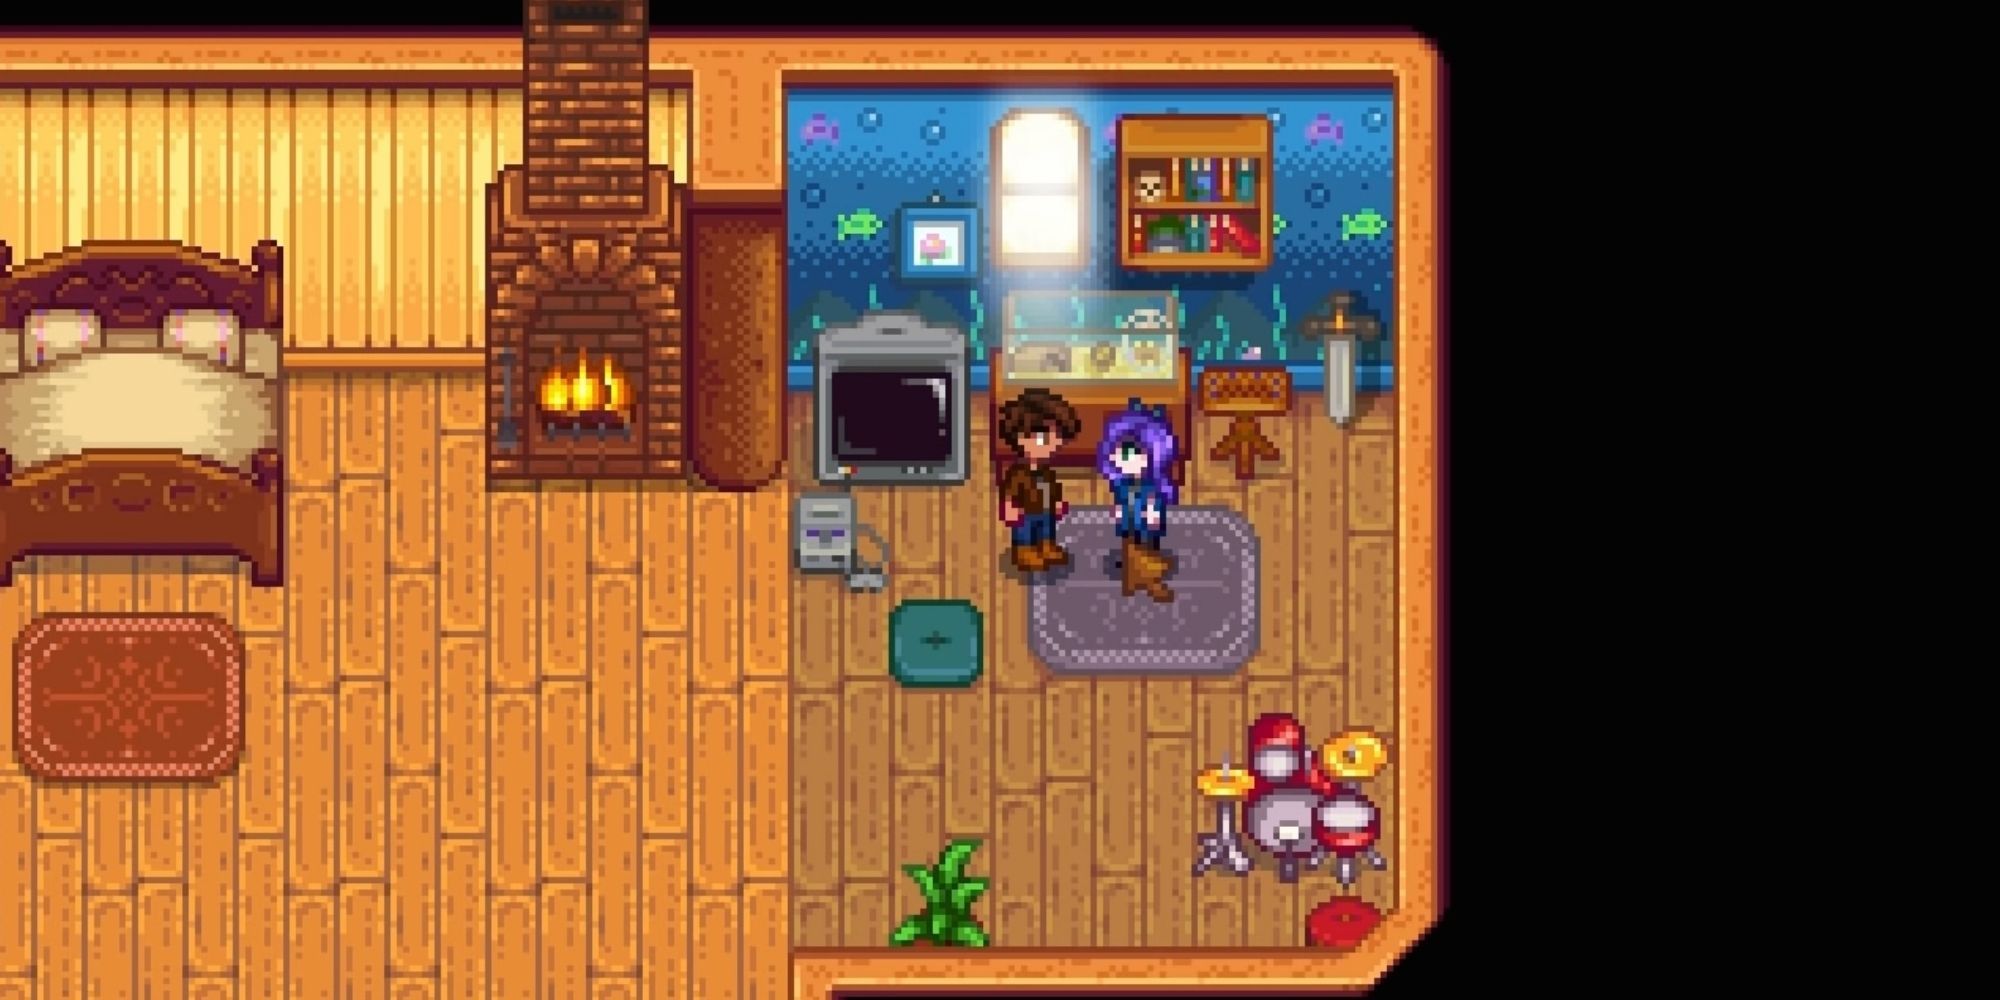 The Player Character and Abigail In Her Room In Stardew Valley